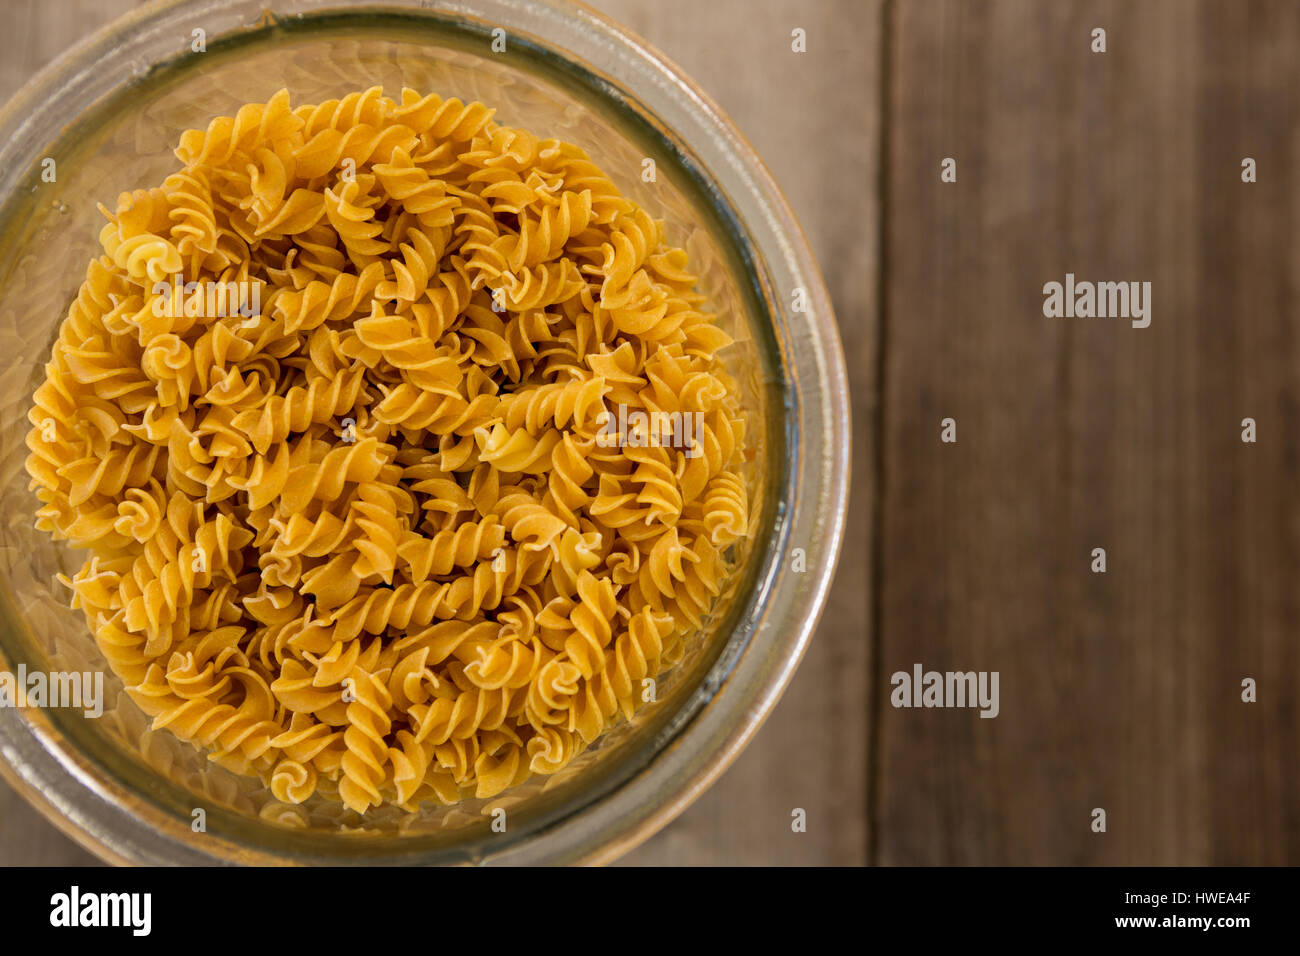 Girandole pasta in a glass container on wooden surface Stock Photo